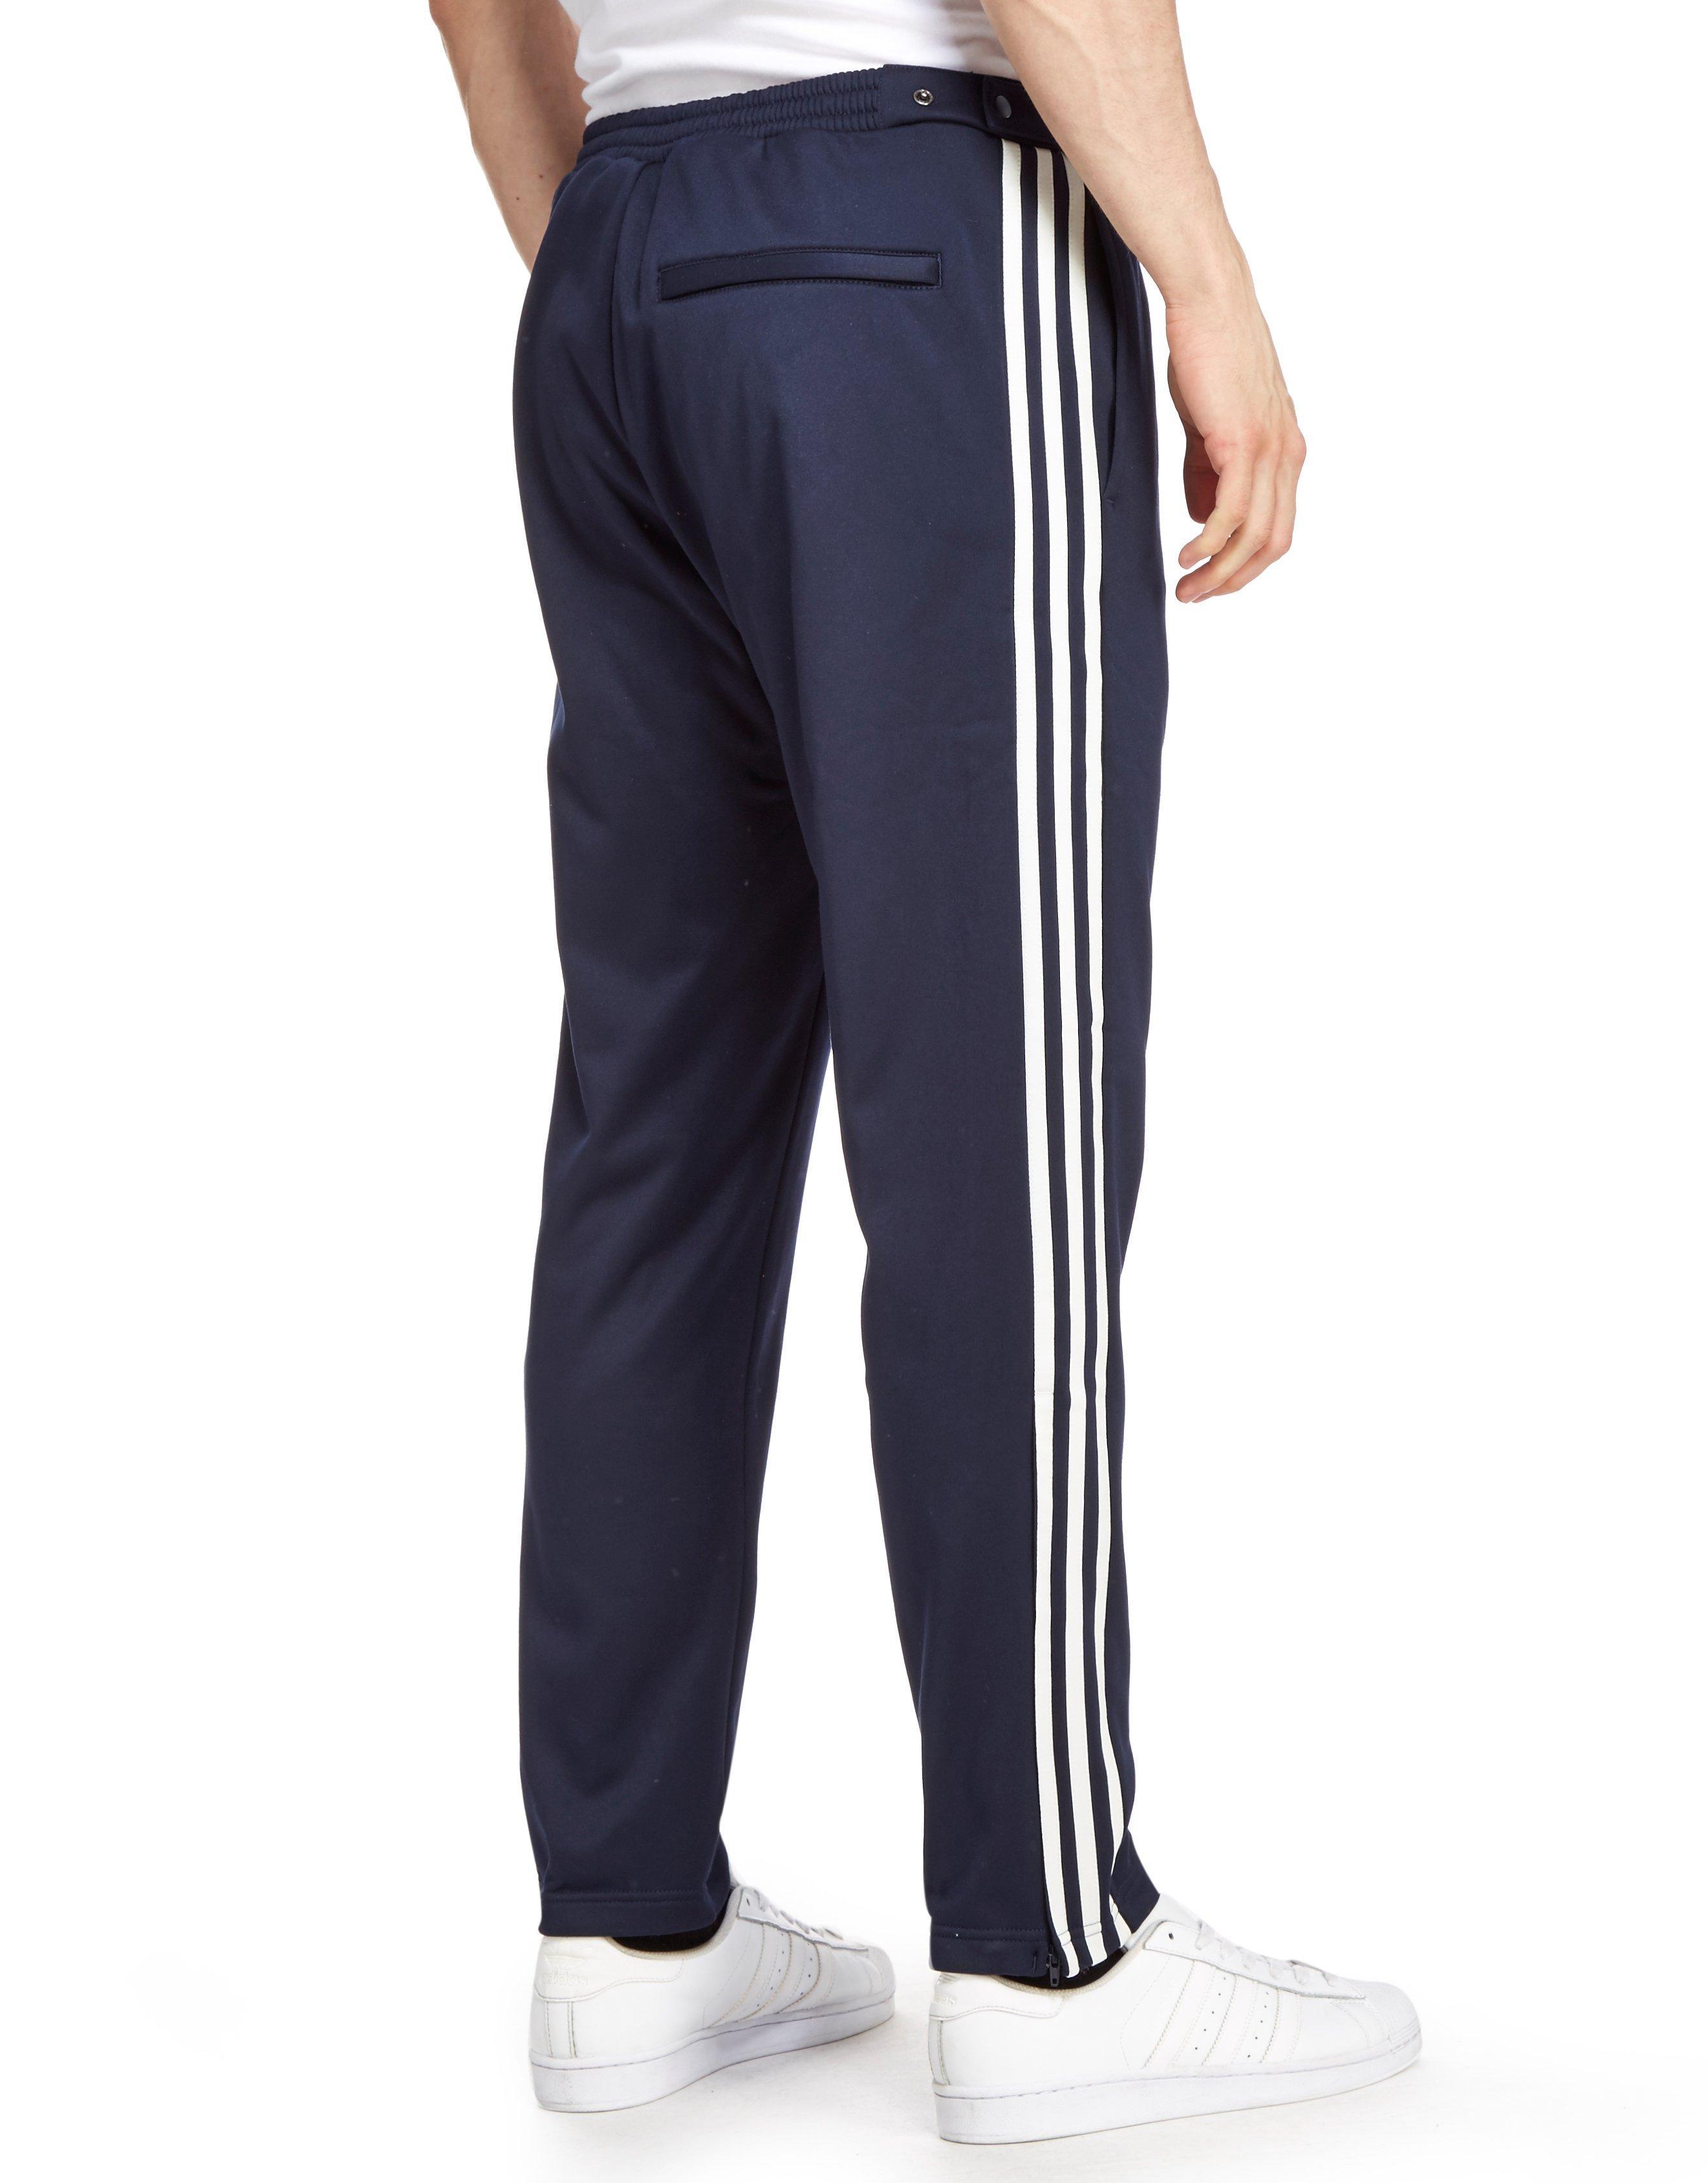 Lyst - Adidas Originals Id96 Track Pants in Blue for Men